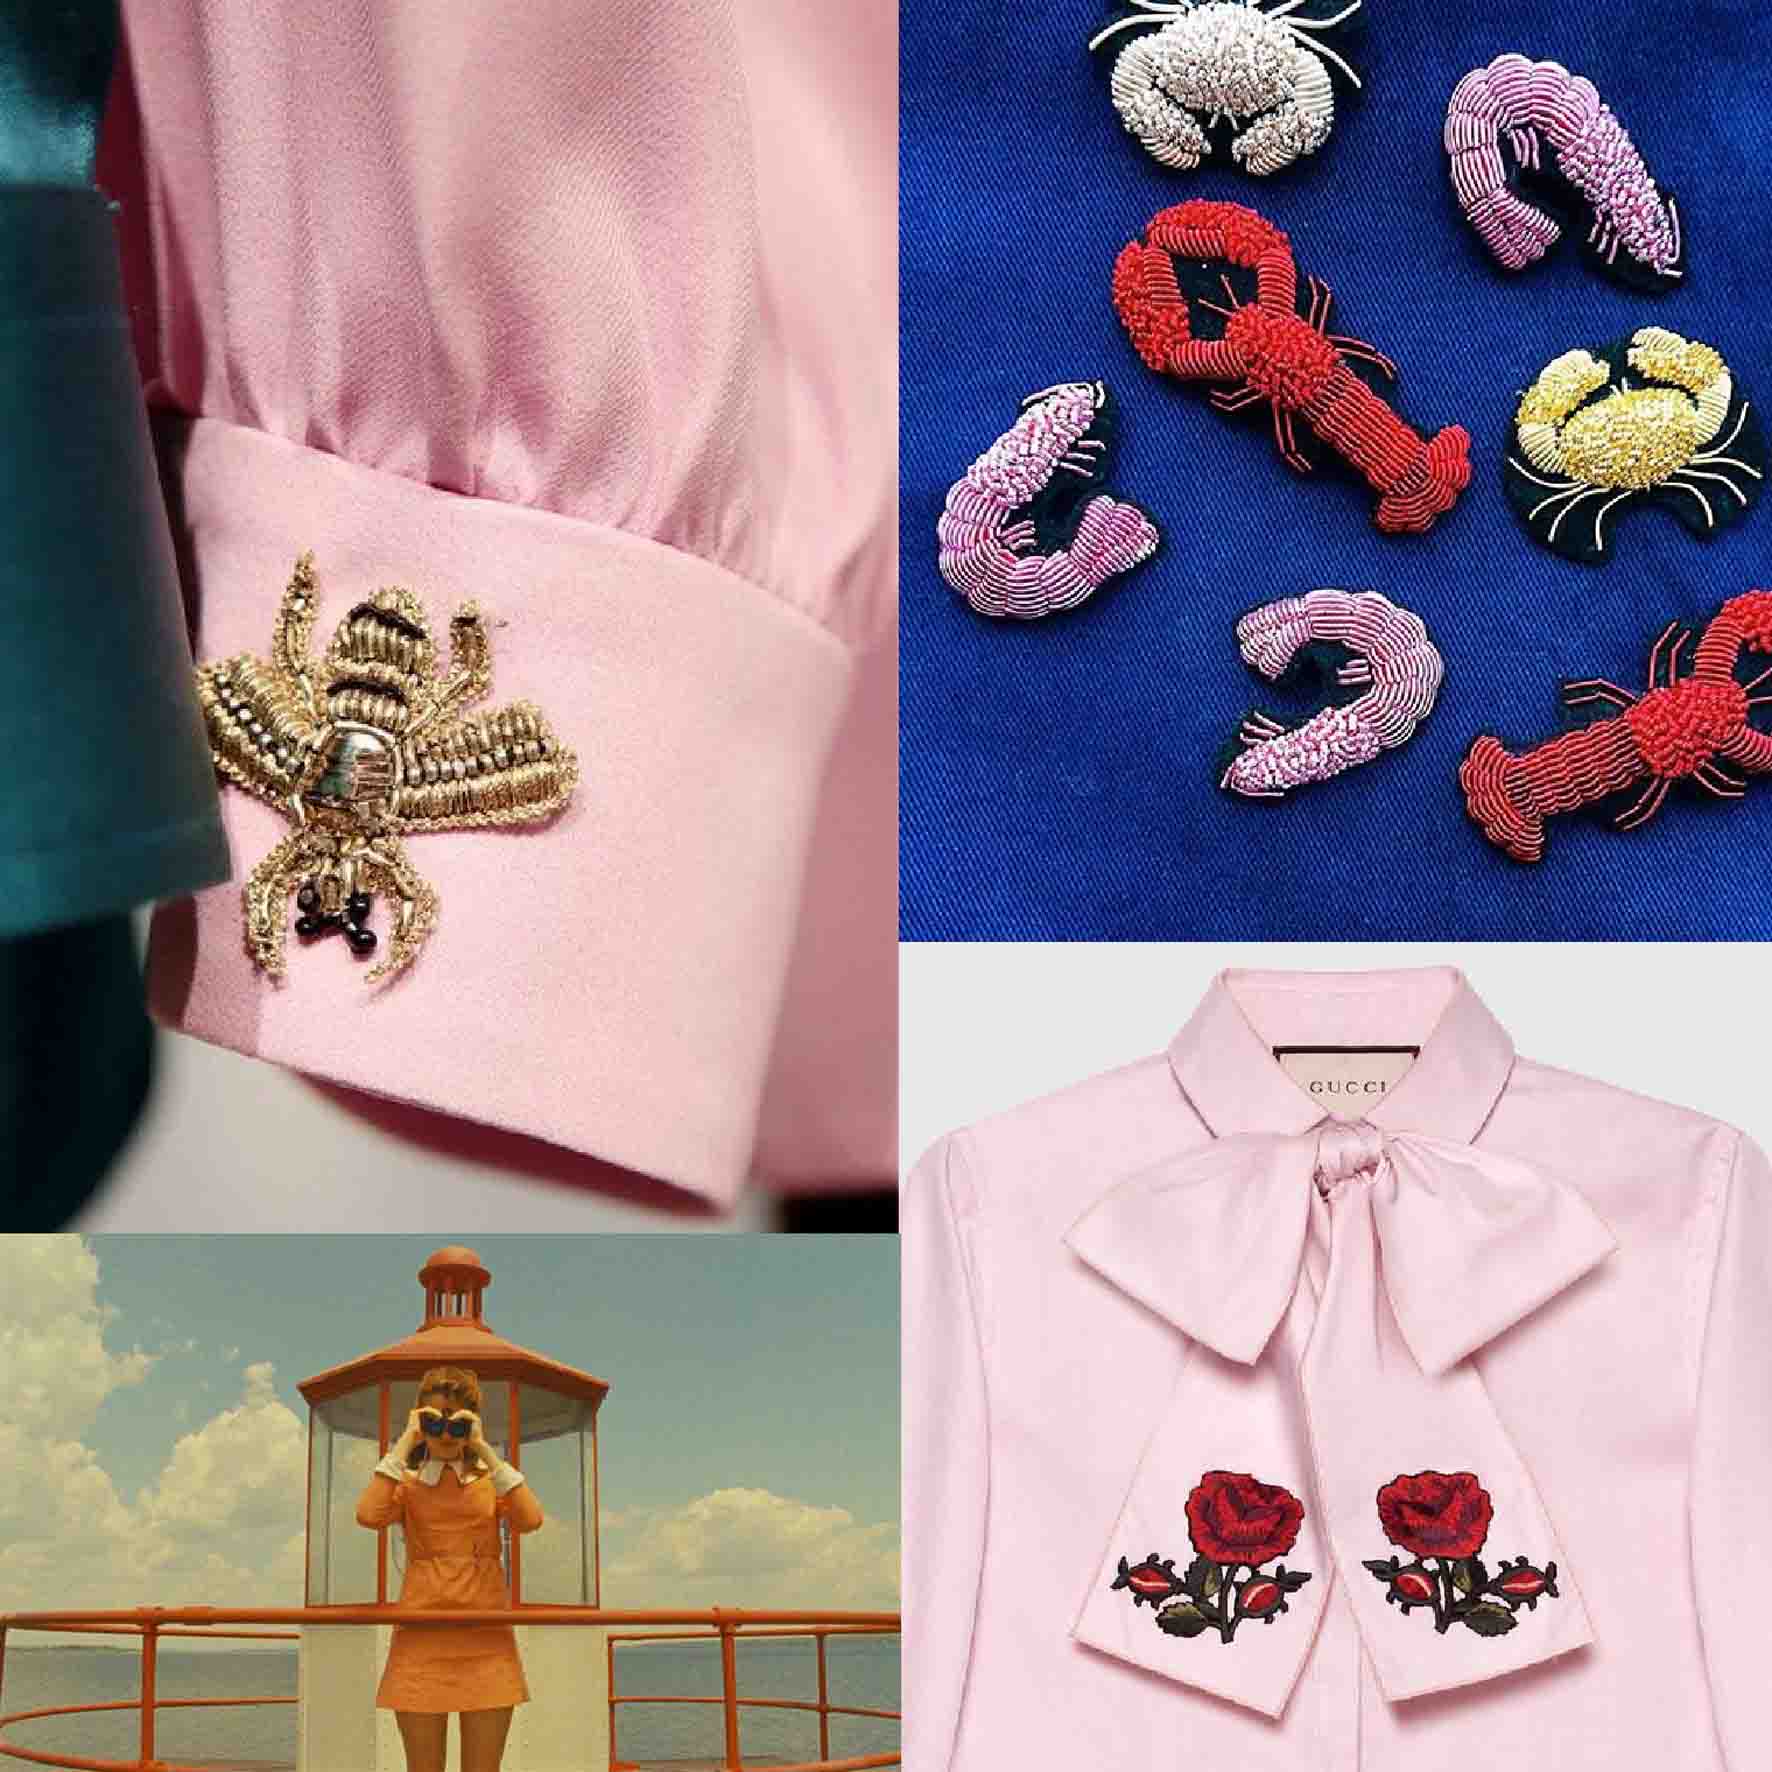 Inspiration: Top left and bottom right Gucci bottom left Suzy Bishop in Moonrise Kingdom Top Right Hattie McGill Embroidery